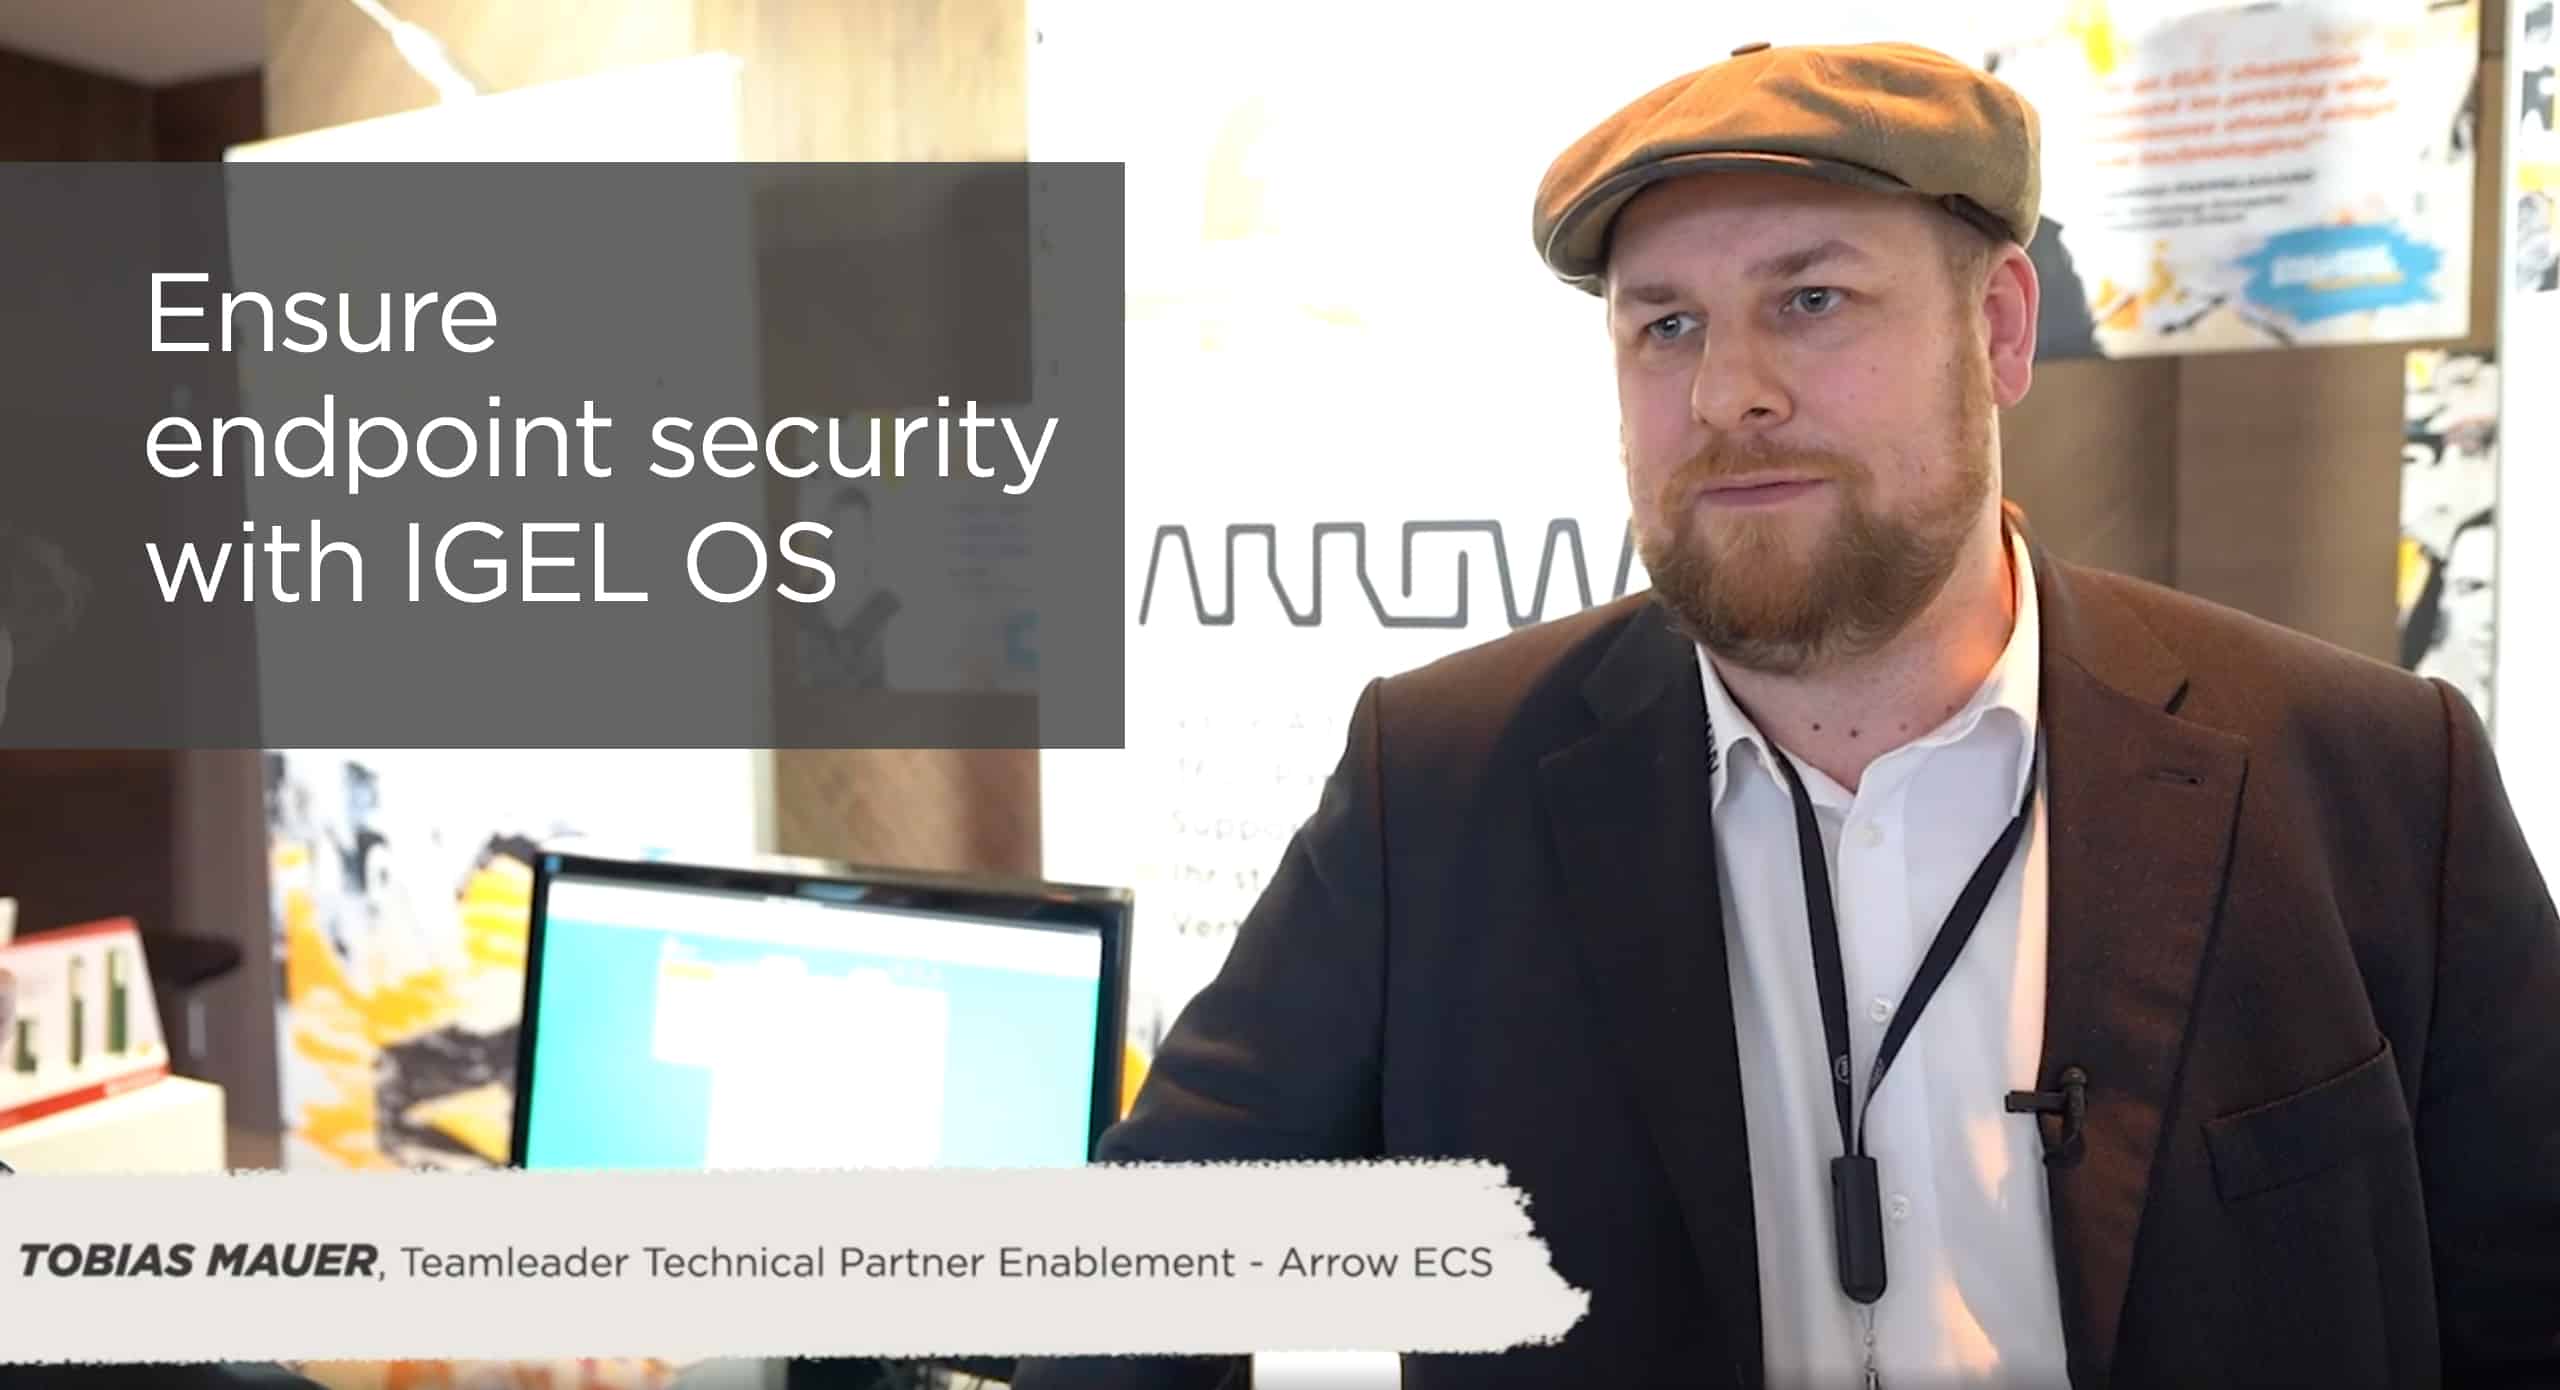 Ensure endpoint security with IGEL OS